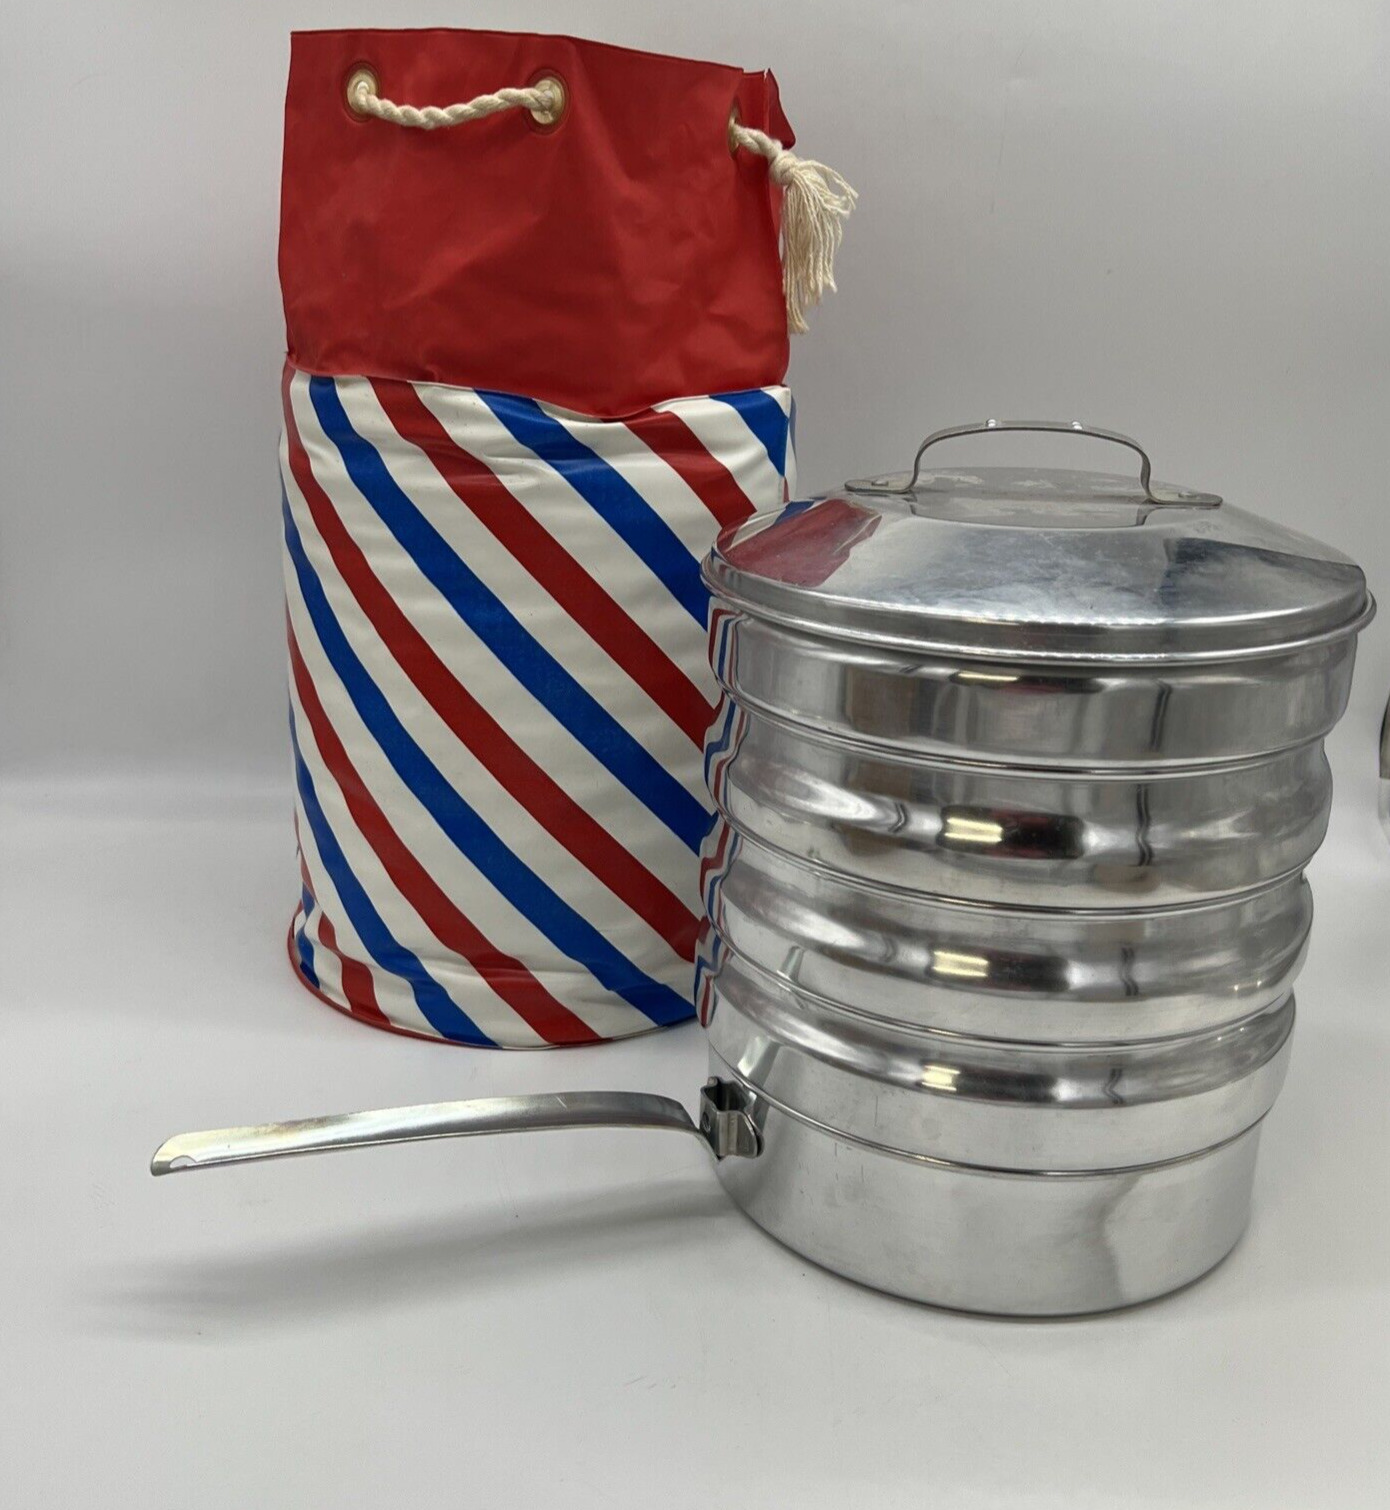 Vintage Lunch Box Picnic Pack Food Carrier Server Aluminum Party Regal Ware 5205